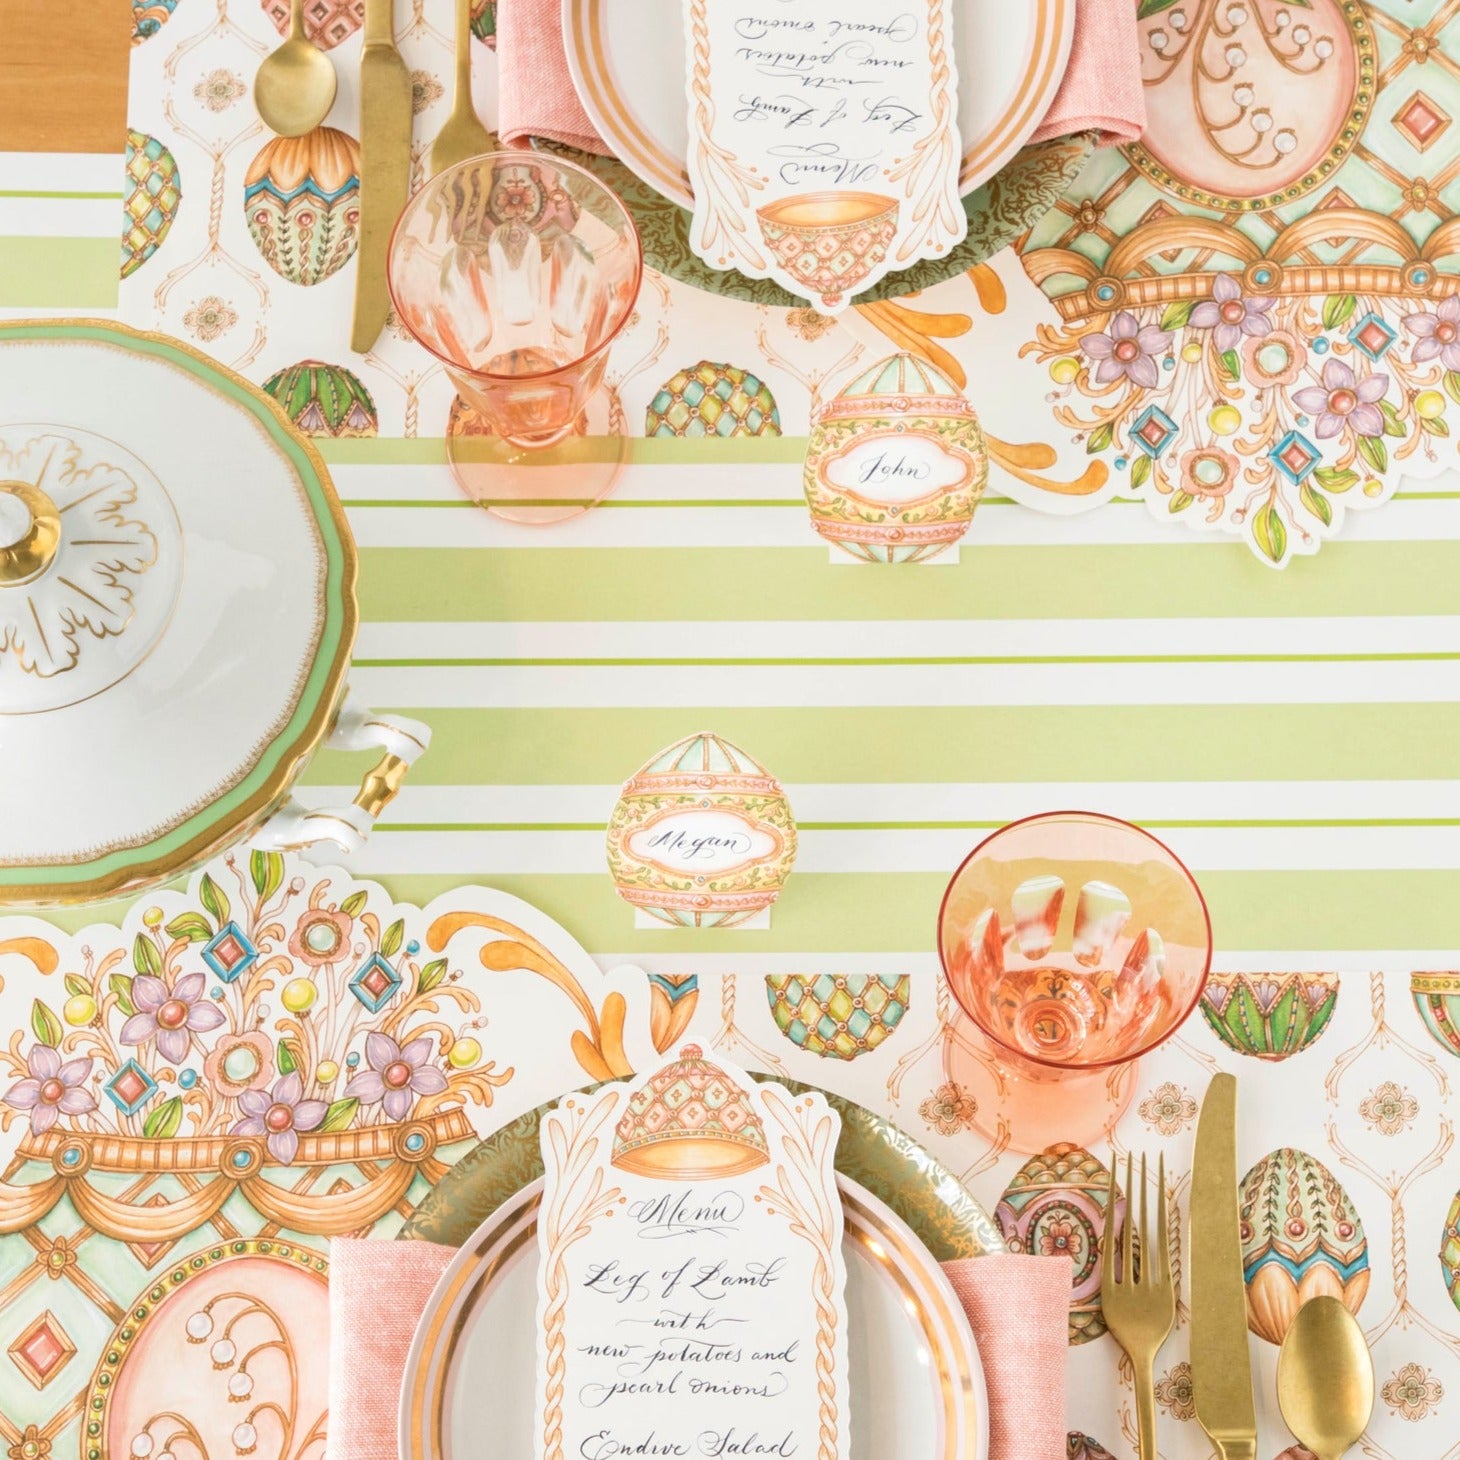 A year-round celebration table setting with a pink and green floral pattern complimented by the Hester &amp; Cook Green Awning Stripe Runner.